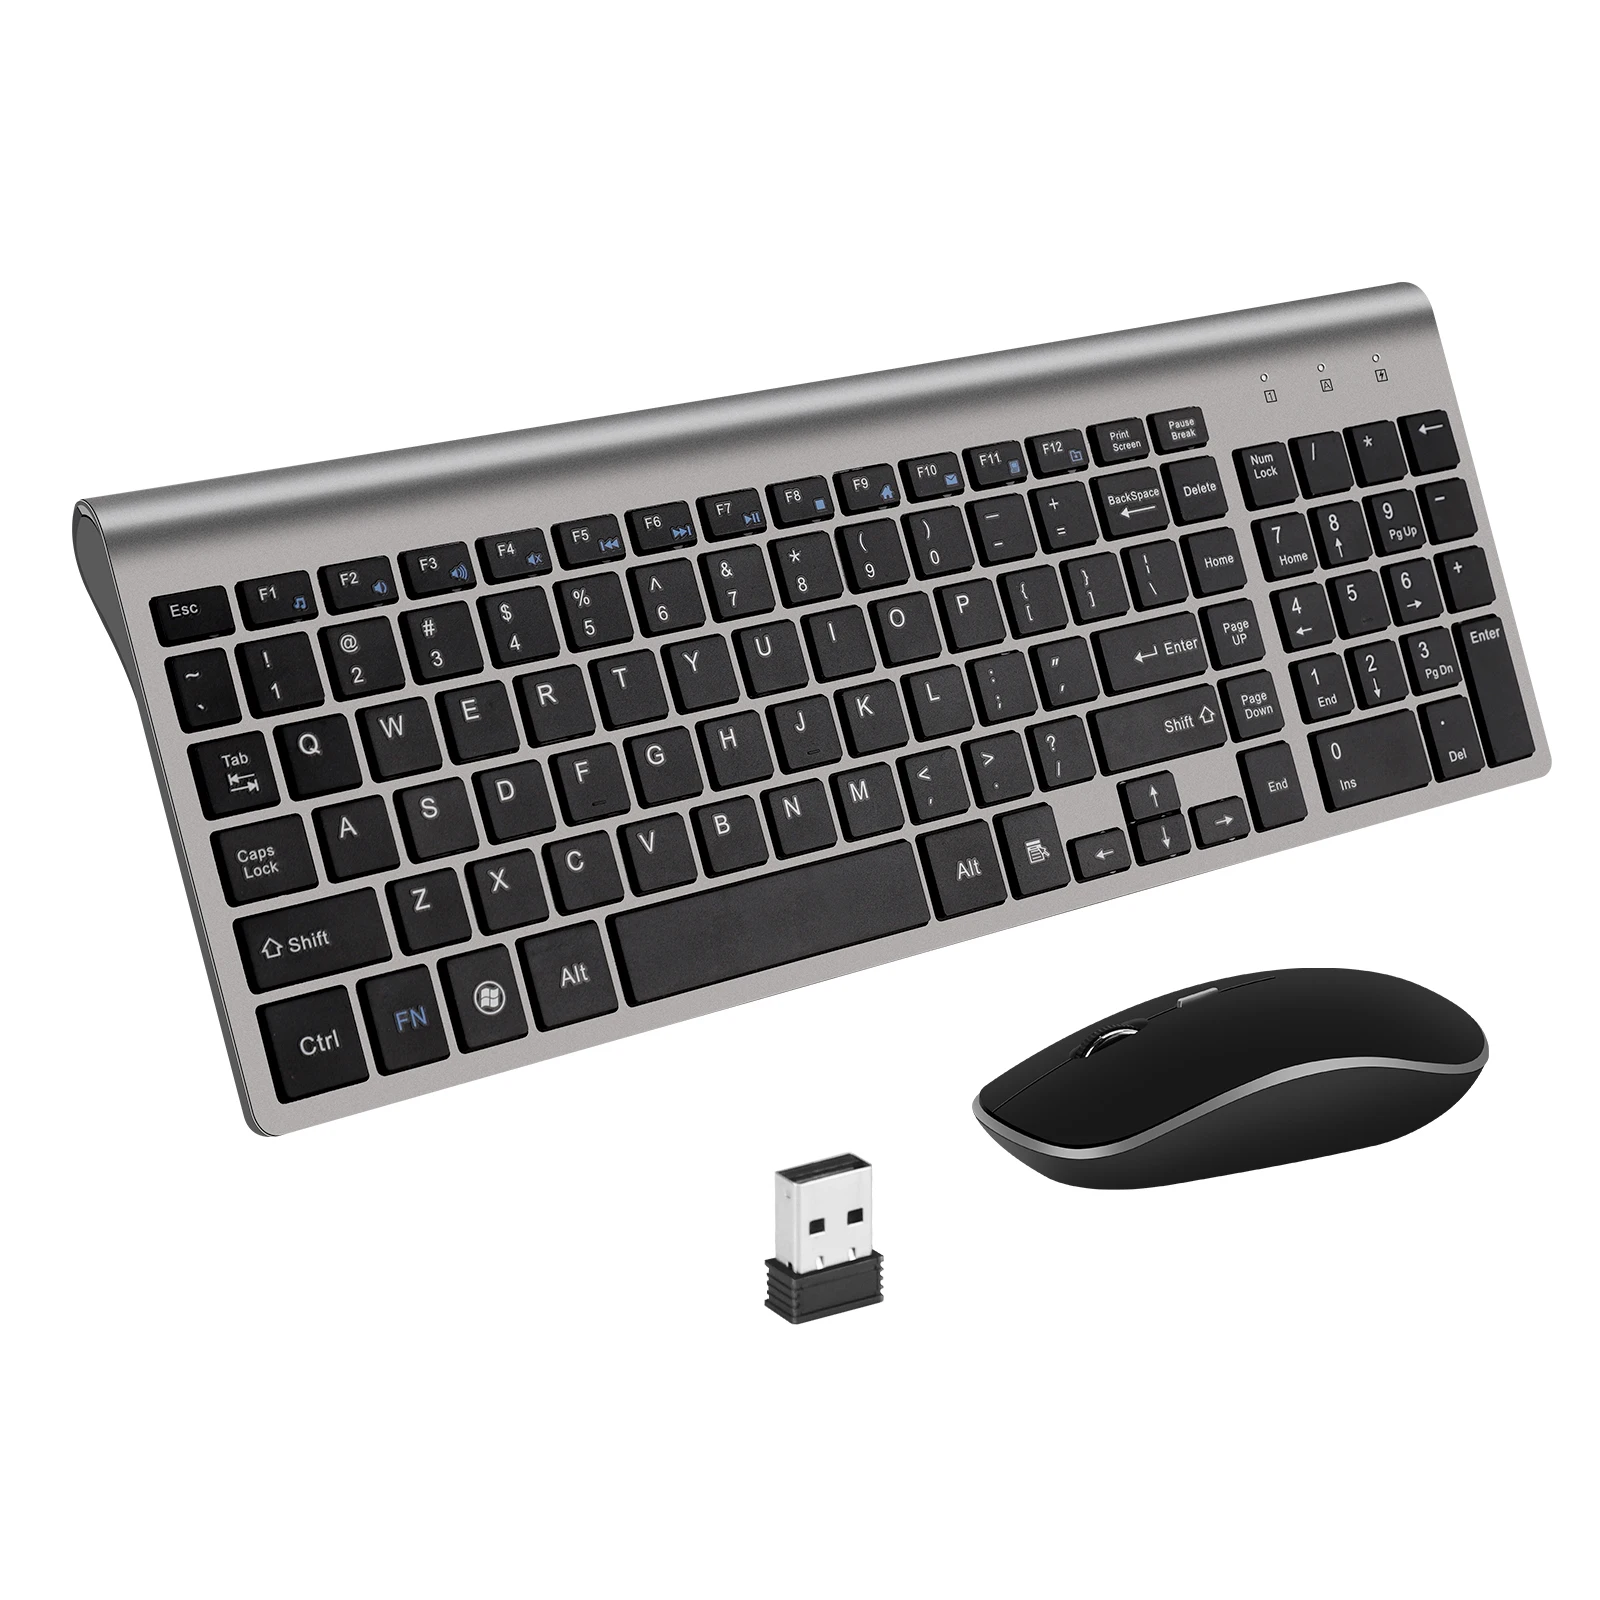 

E168 2.4G Wireless Silent Keyboard and Mouse Mini Multimedia Full-size Keyboard Mouse Combo Set For Notebook Laptop Desktop PC